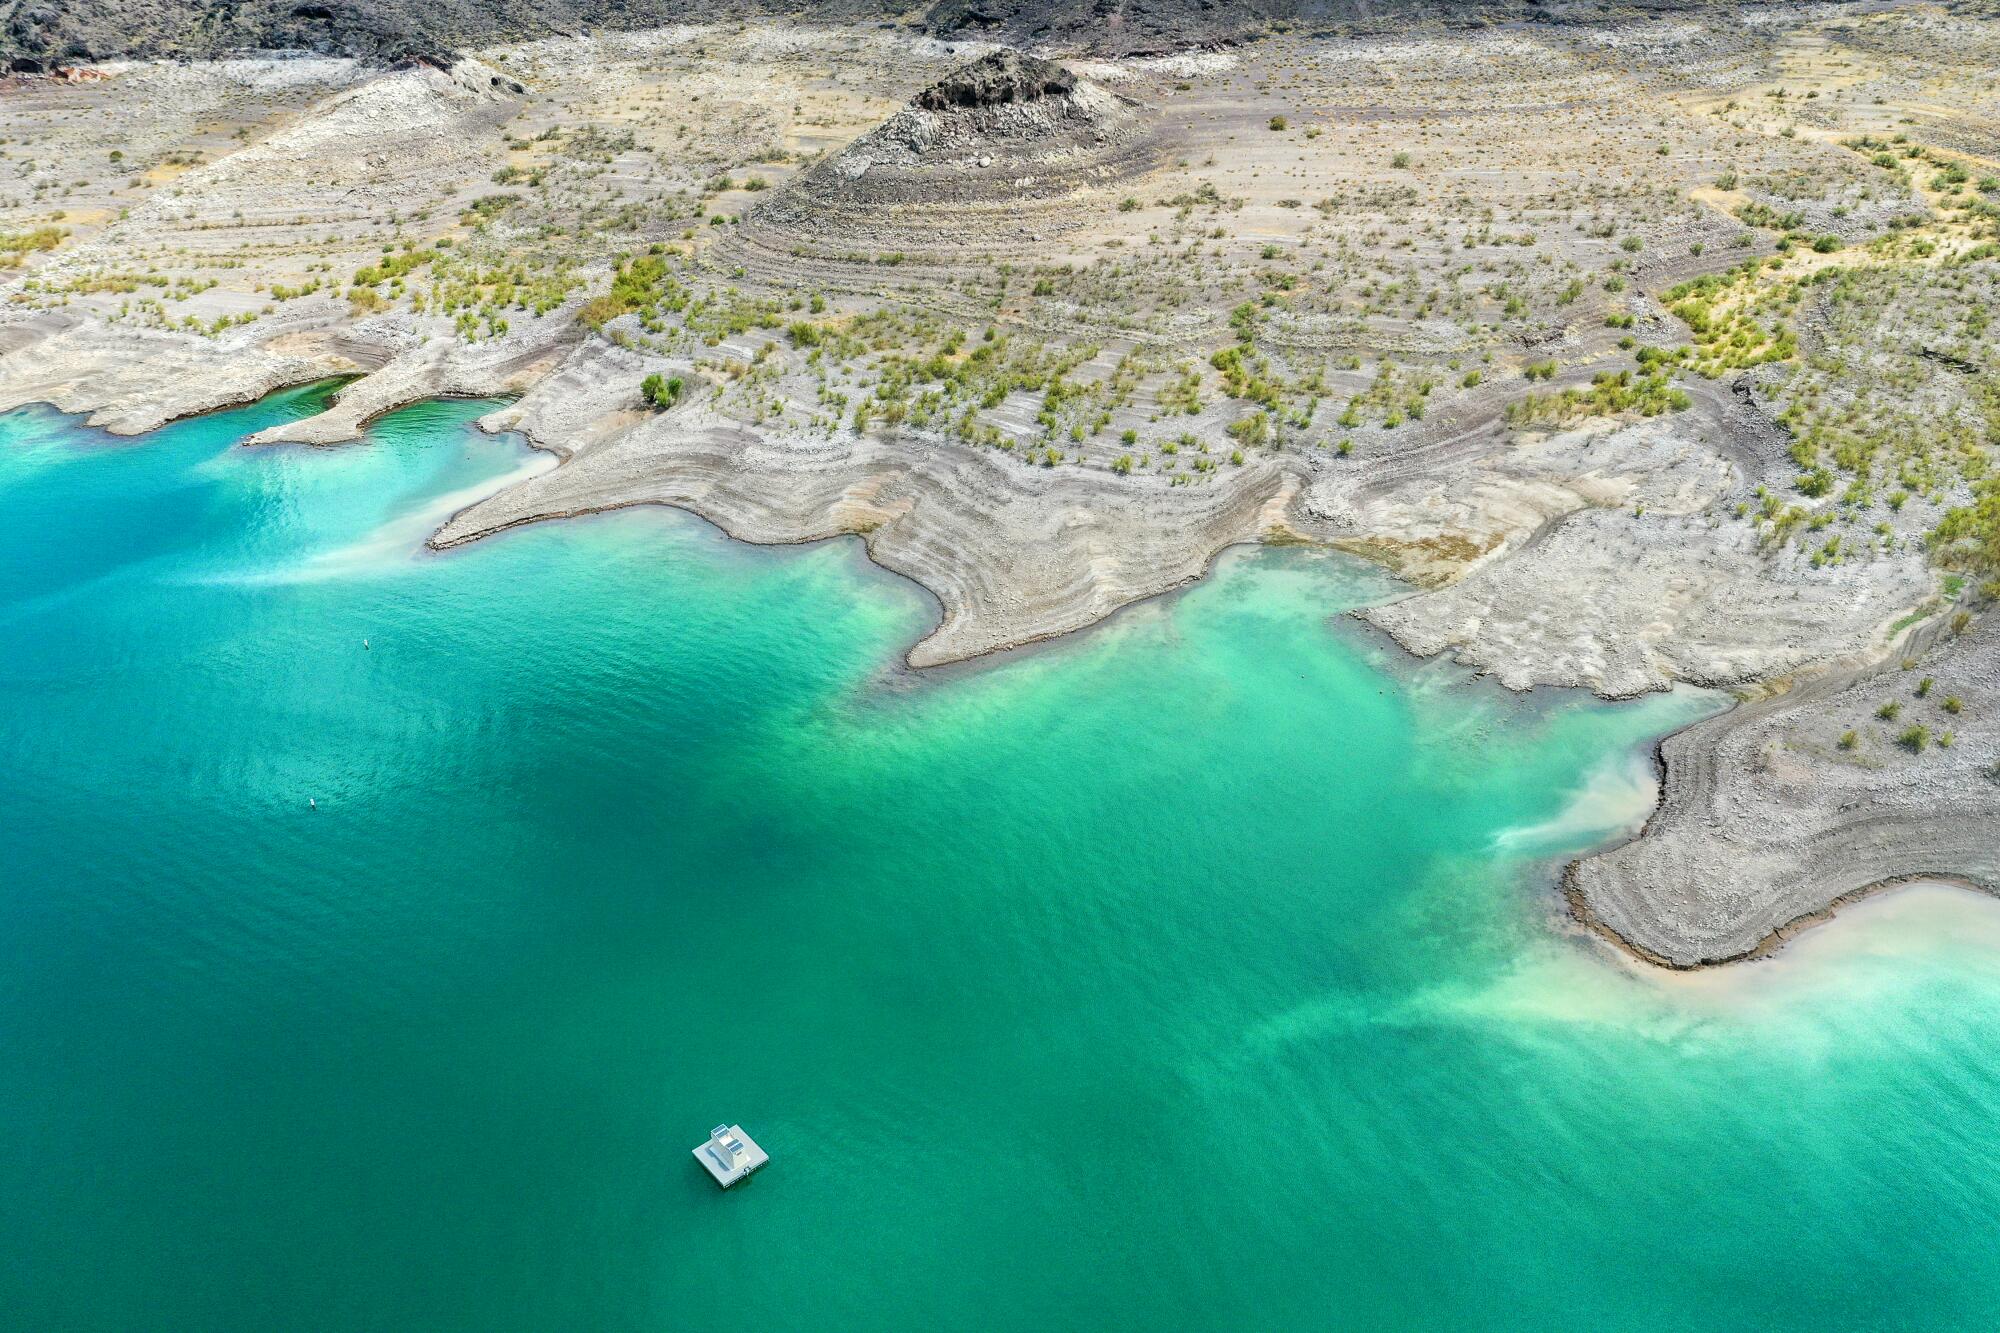 A green lake contrasts with a barren desert landscape